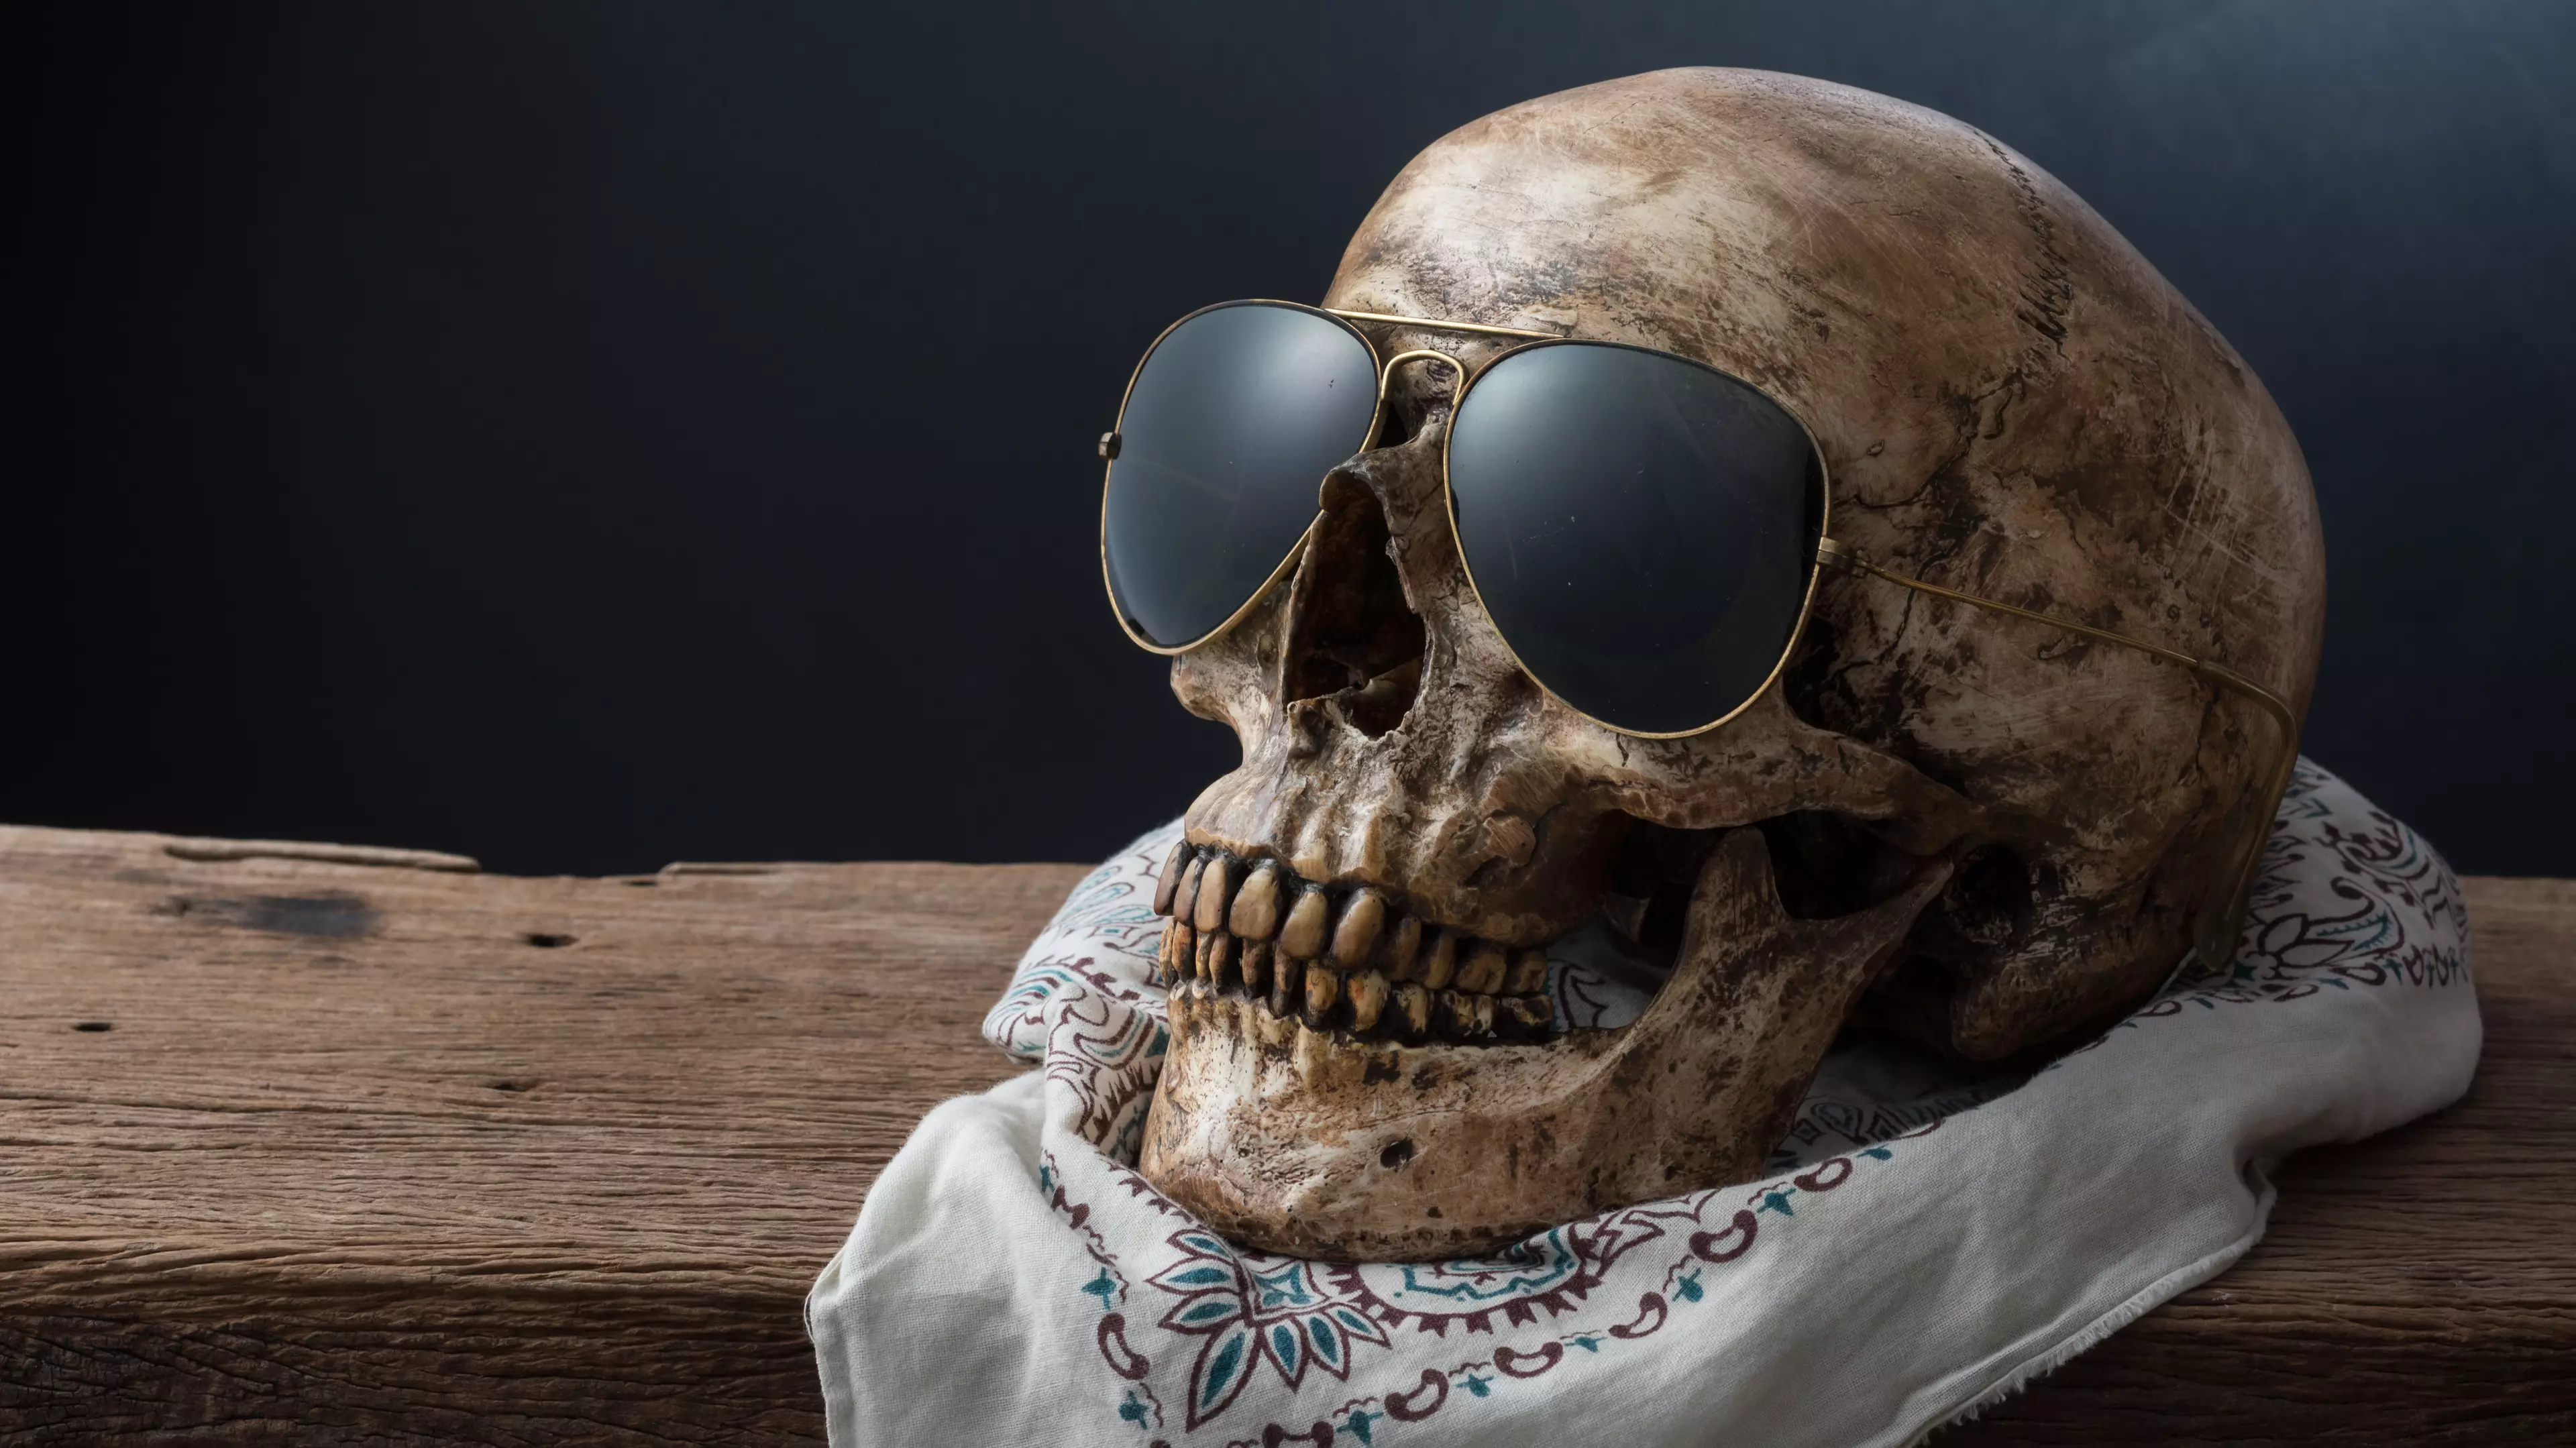 Skull Wearing Sunglasses On Family's Mantelpiece Turns Out To Be Man Missing For Eight Years